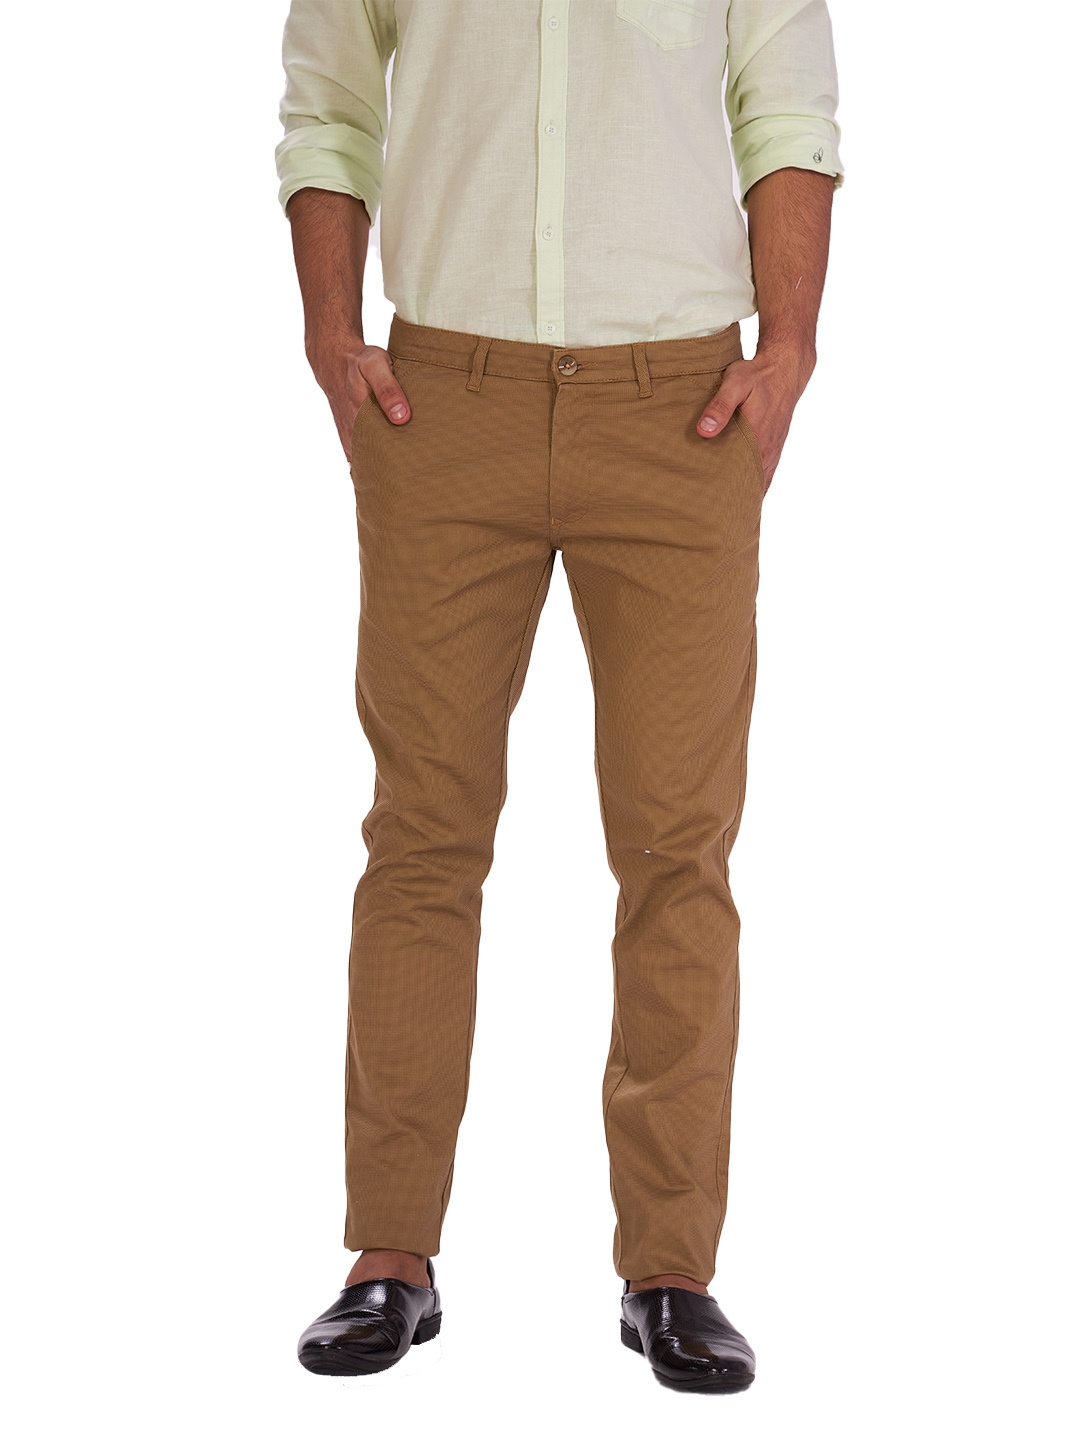 D'cot by Donear | D'cot by Donear Men's Brown Cotton Trousers